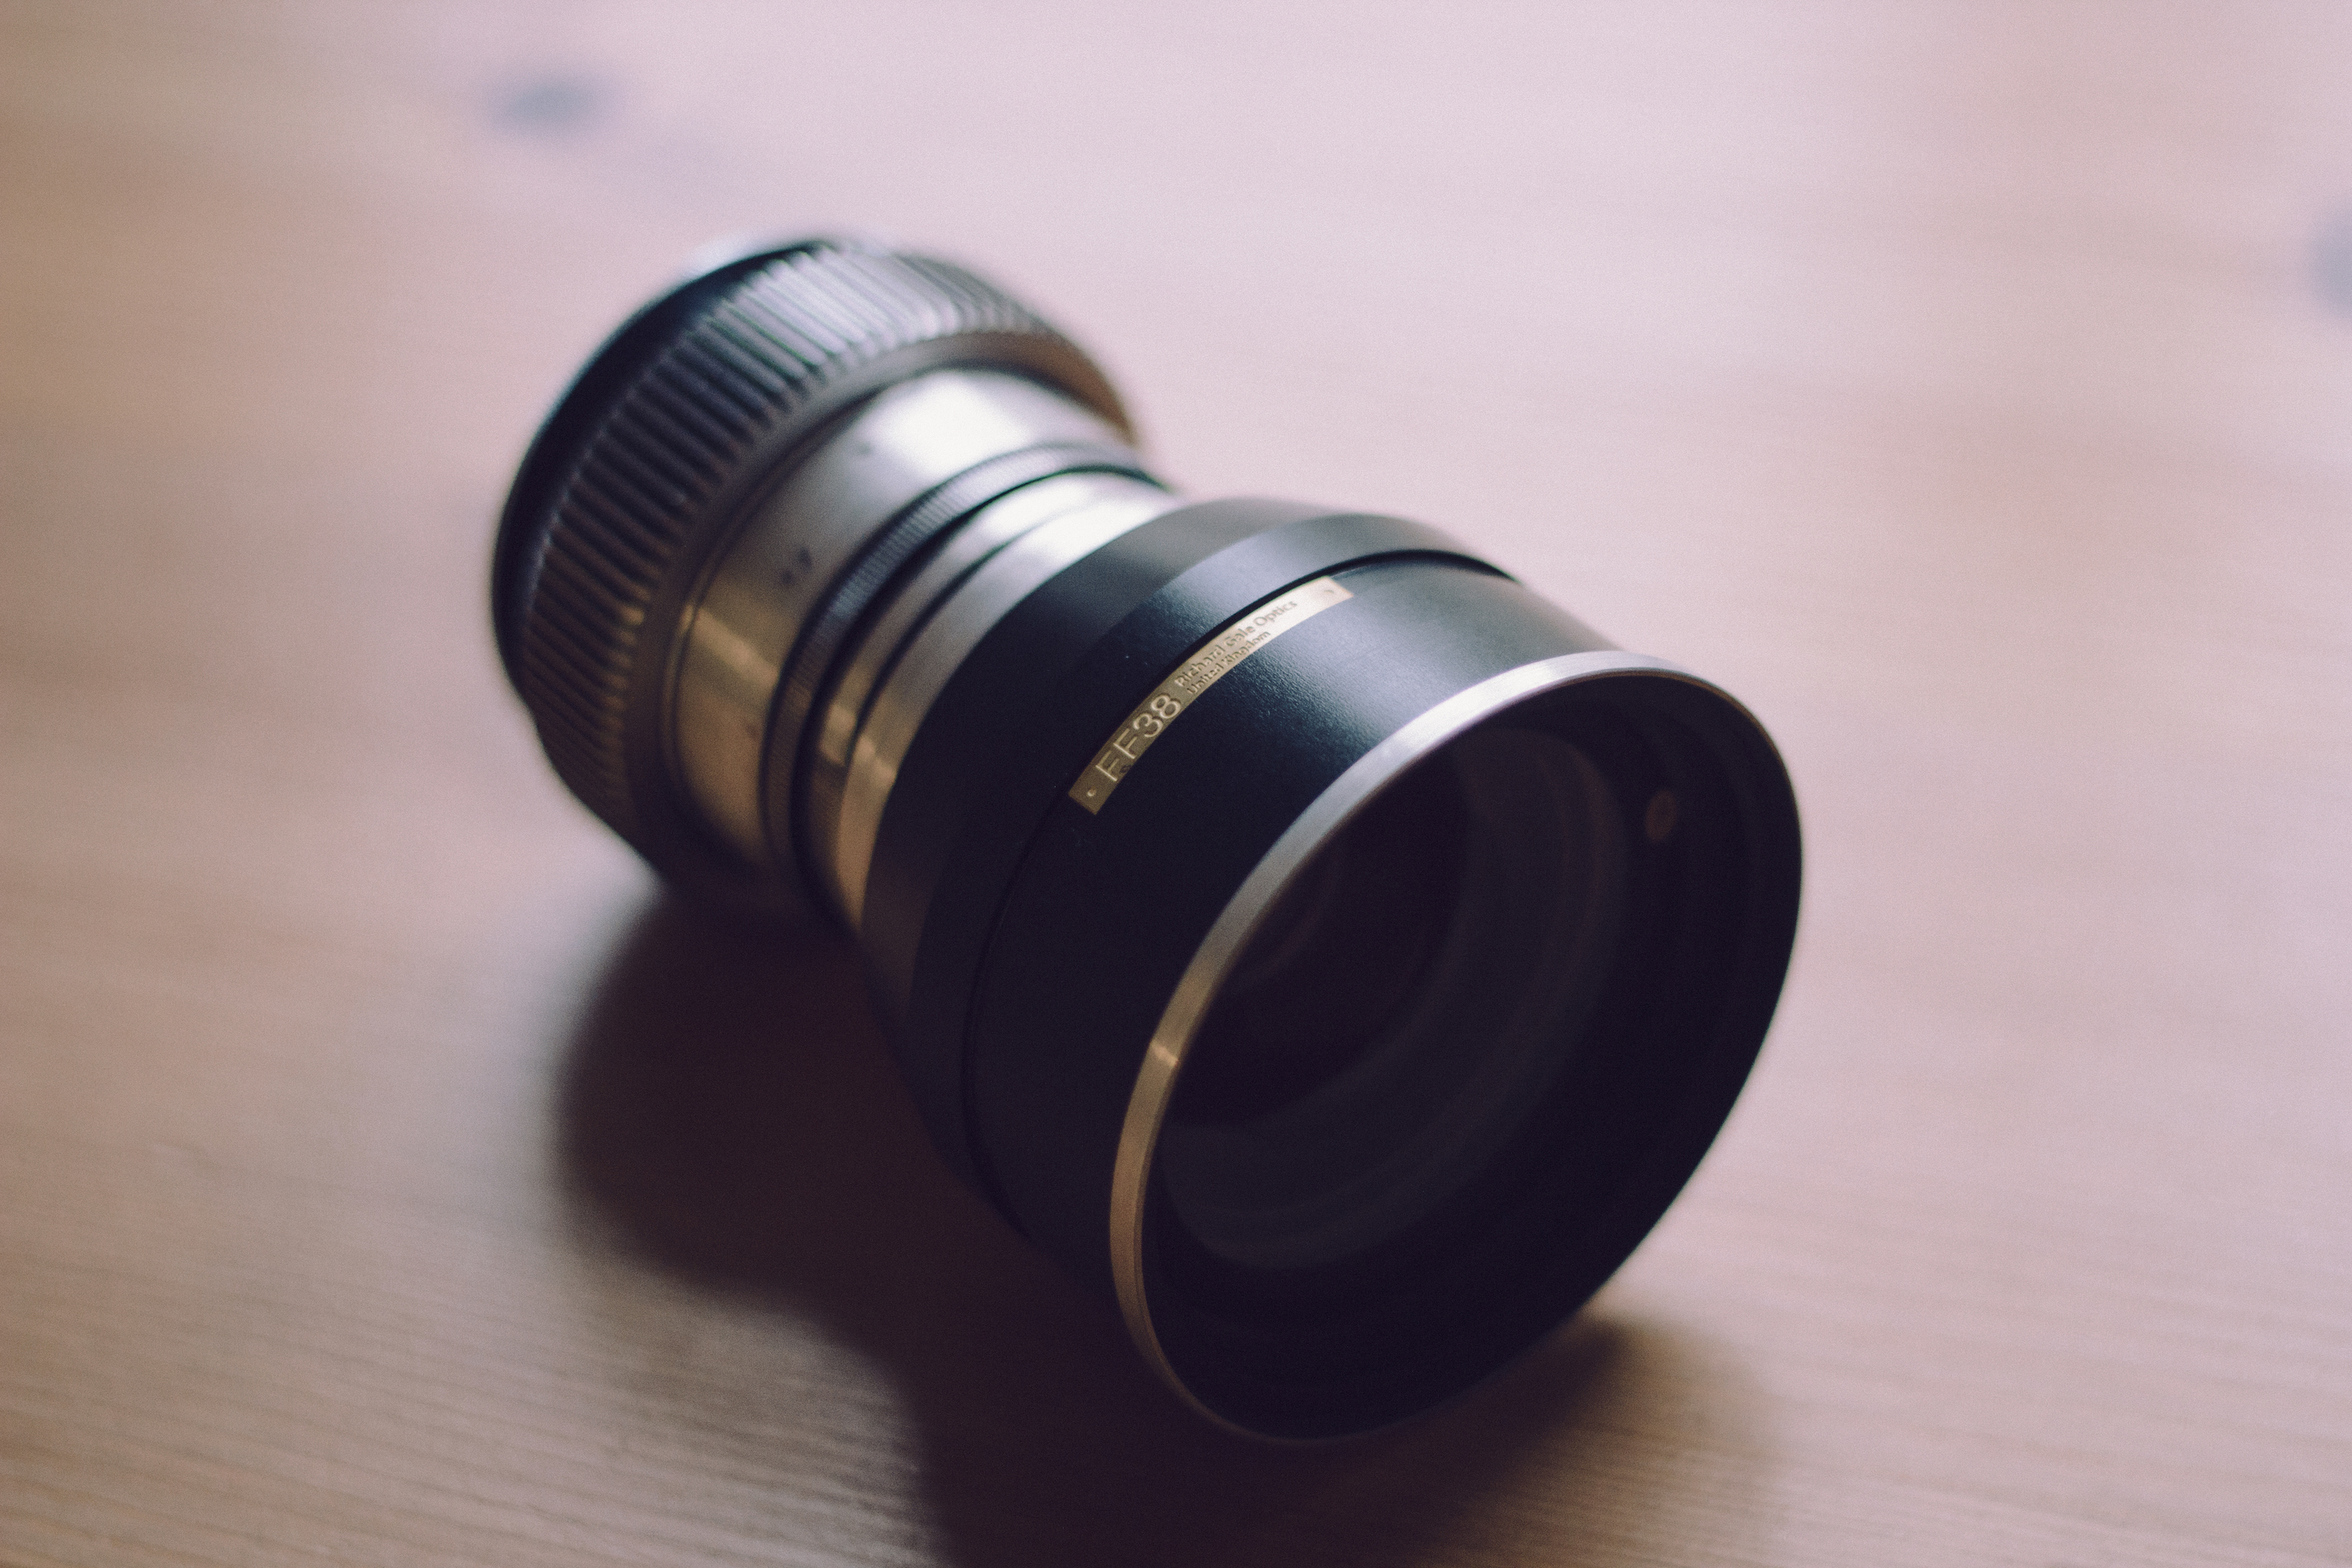 Photo:  The 38mm converter attached to the 58mm lens. Anders Lonnfeldt